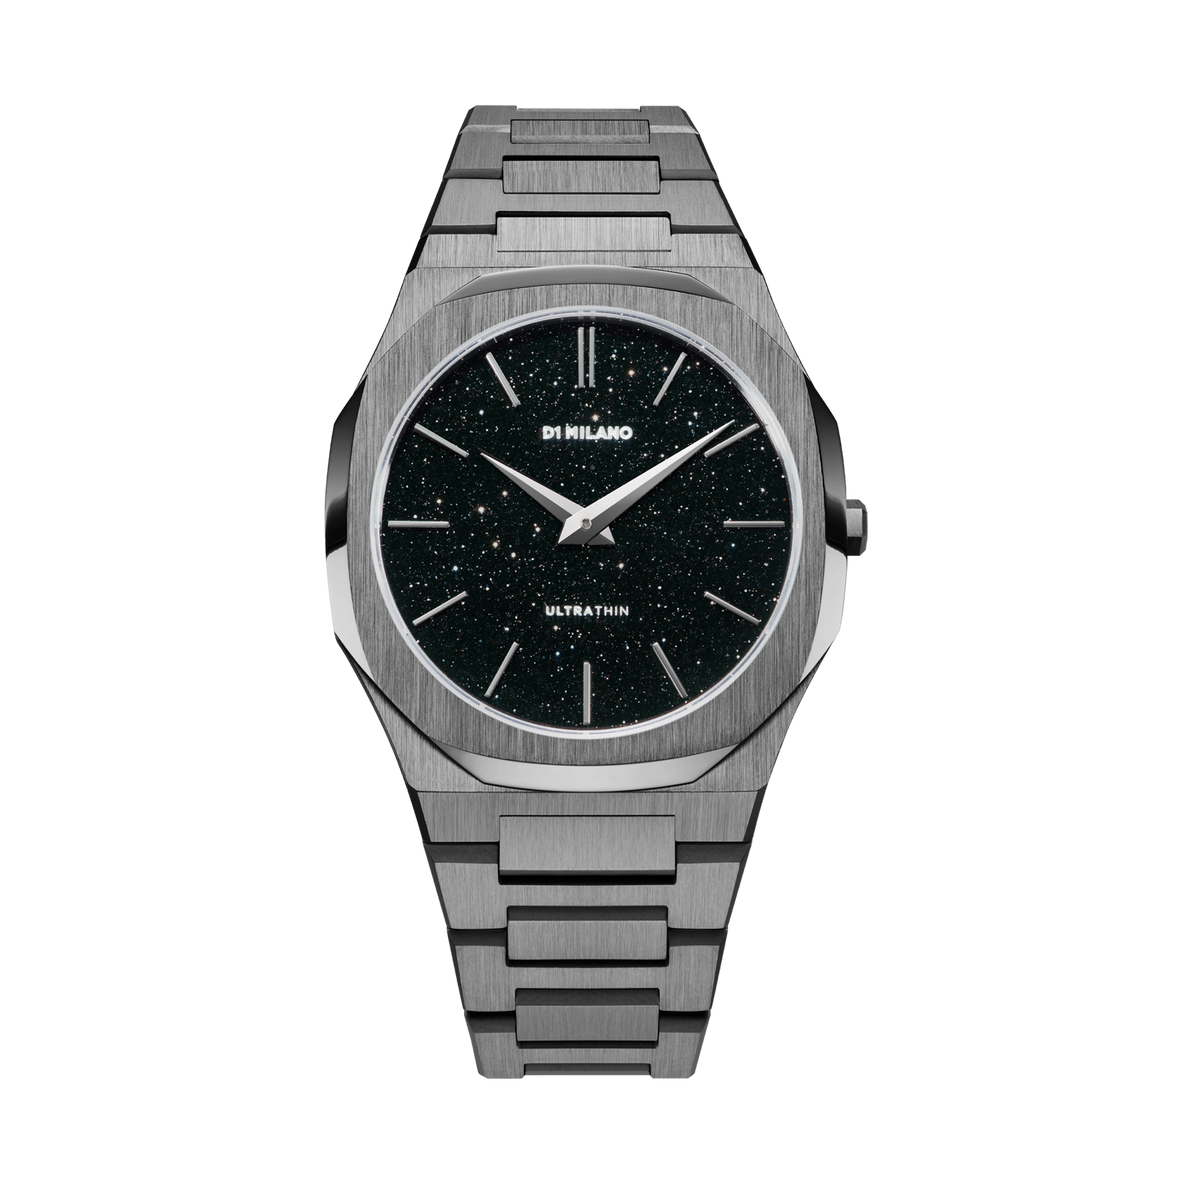 D1 Milano Watches For Men and Women | Shop Online Now - Time Center